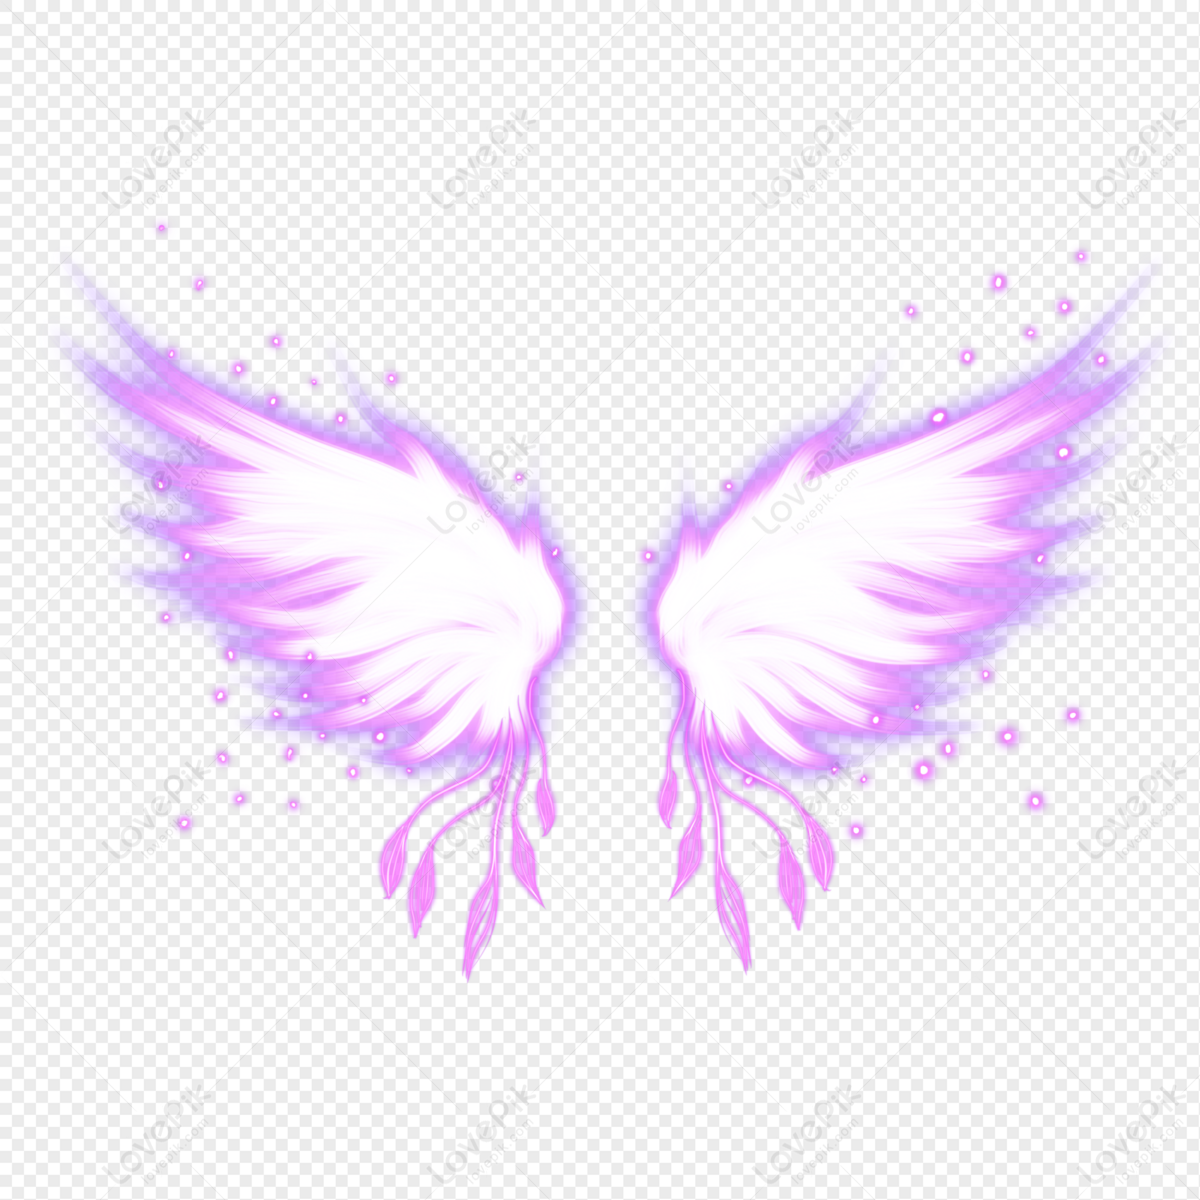 Fluorescent Wings PNG Transparent Background And Clipart Image For Free  Download - Lovepik | 401136710